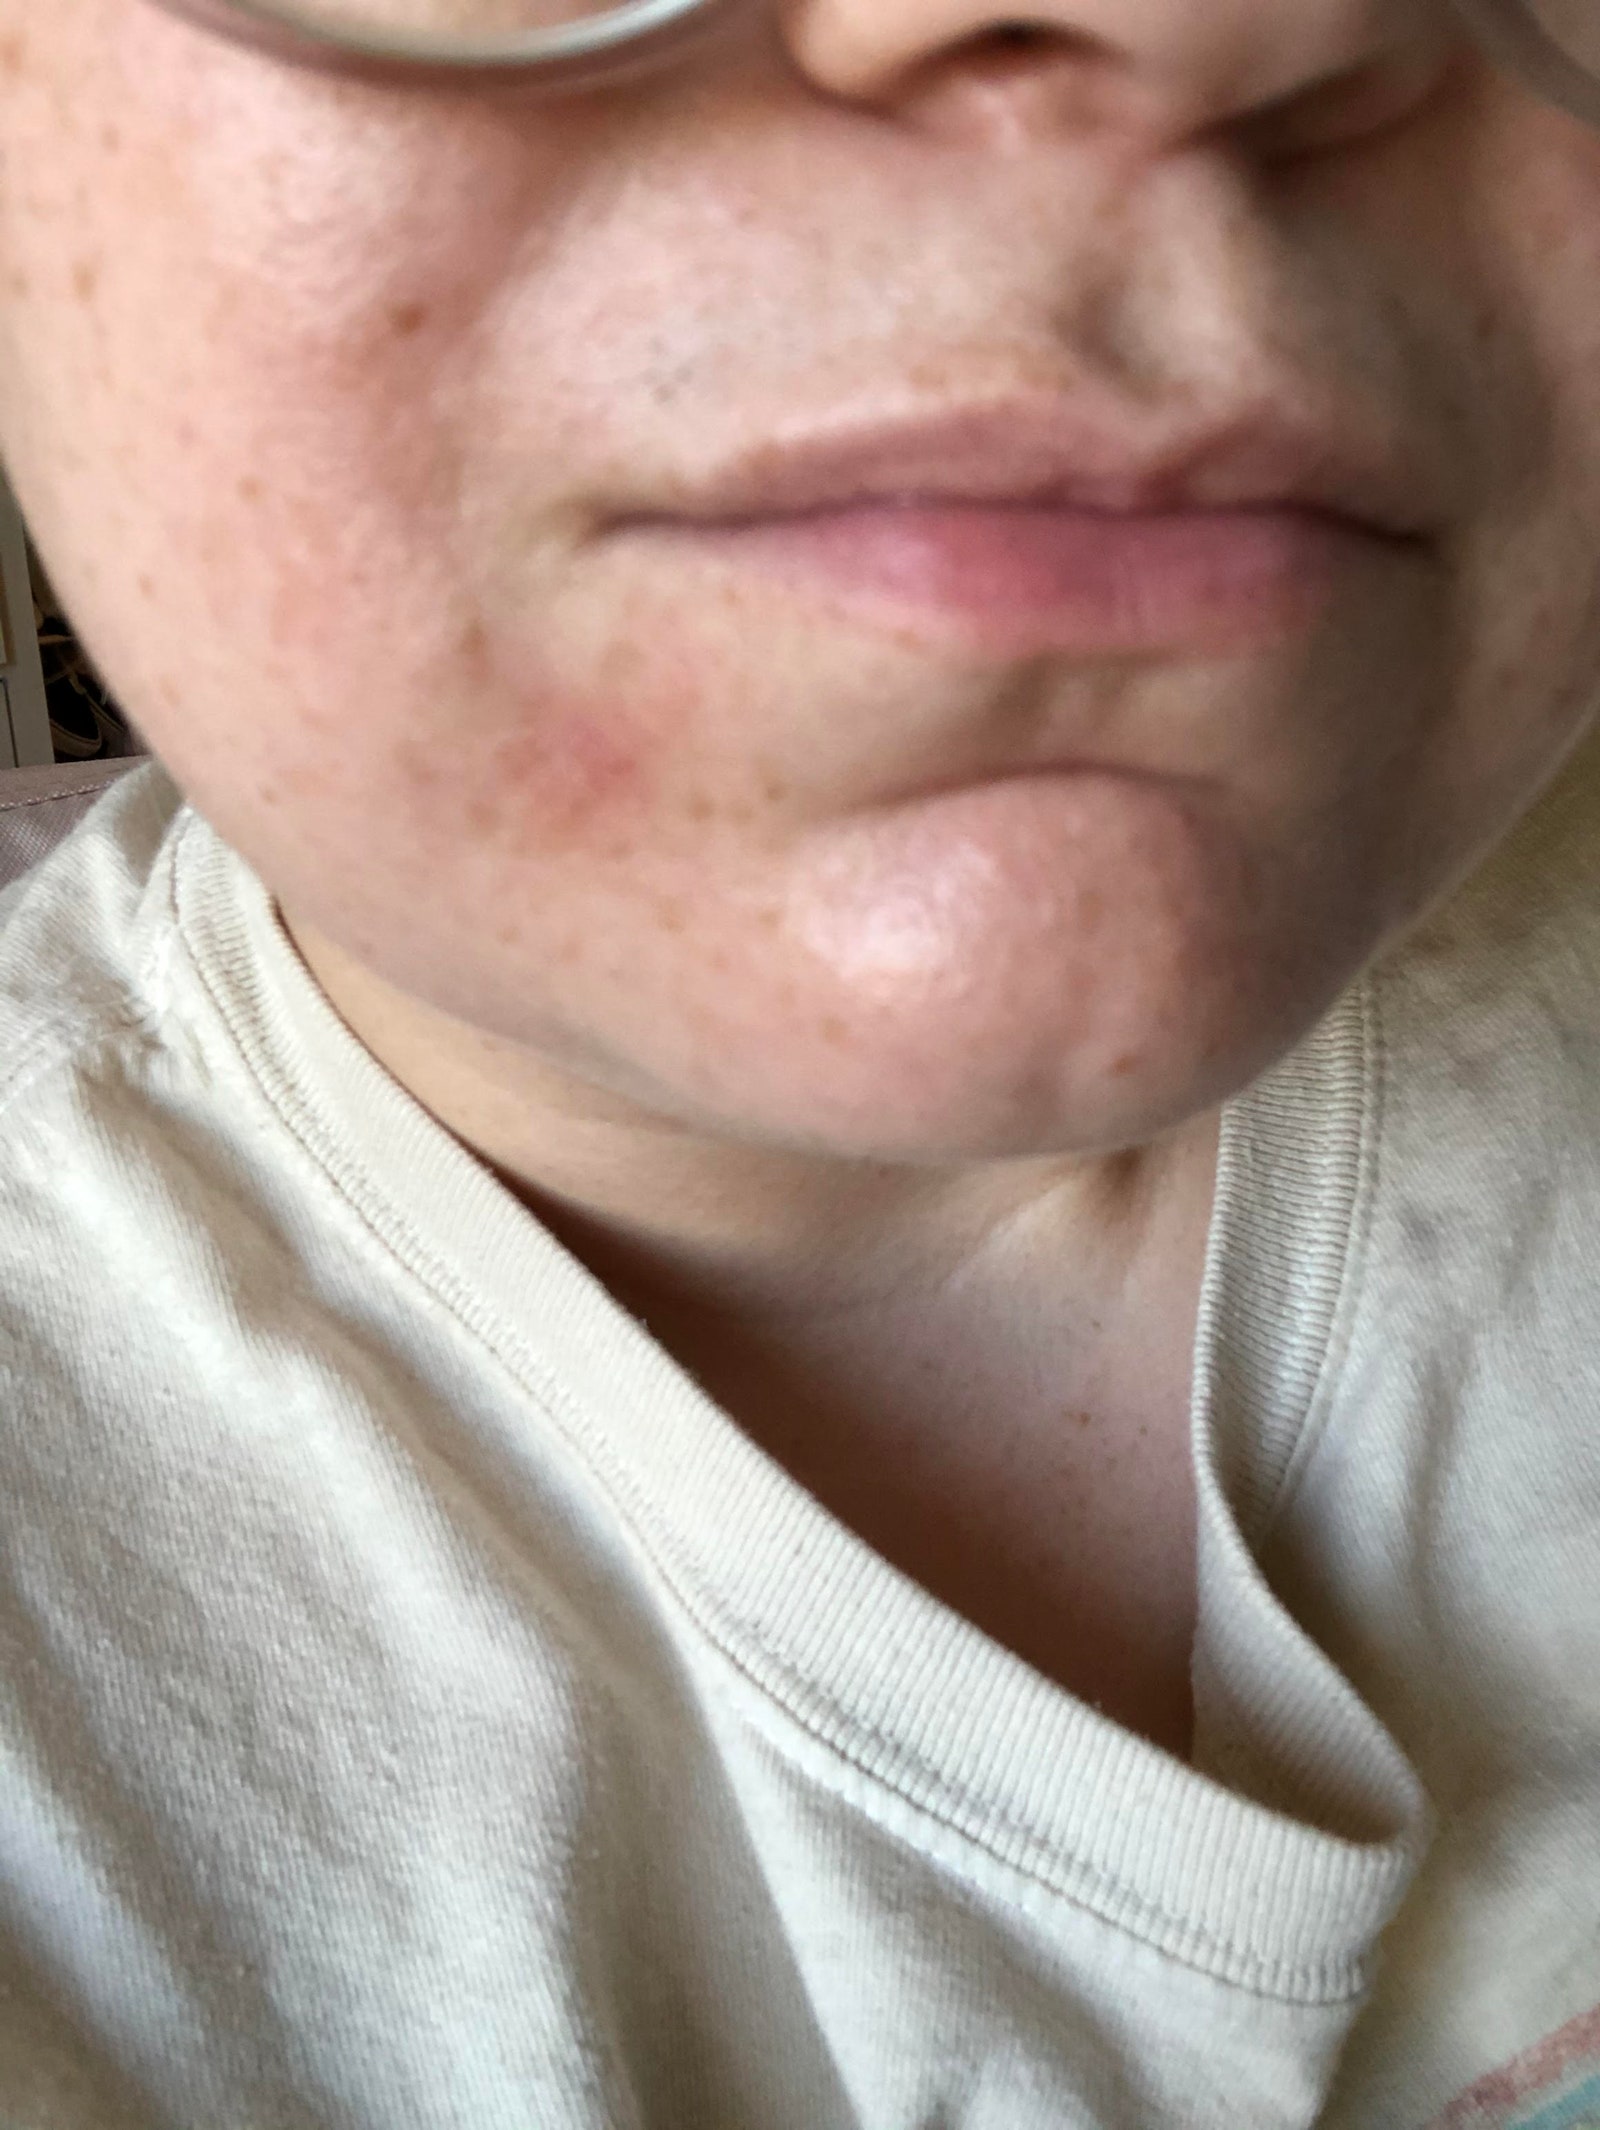 woman with rash around her mouth